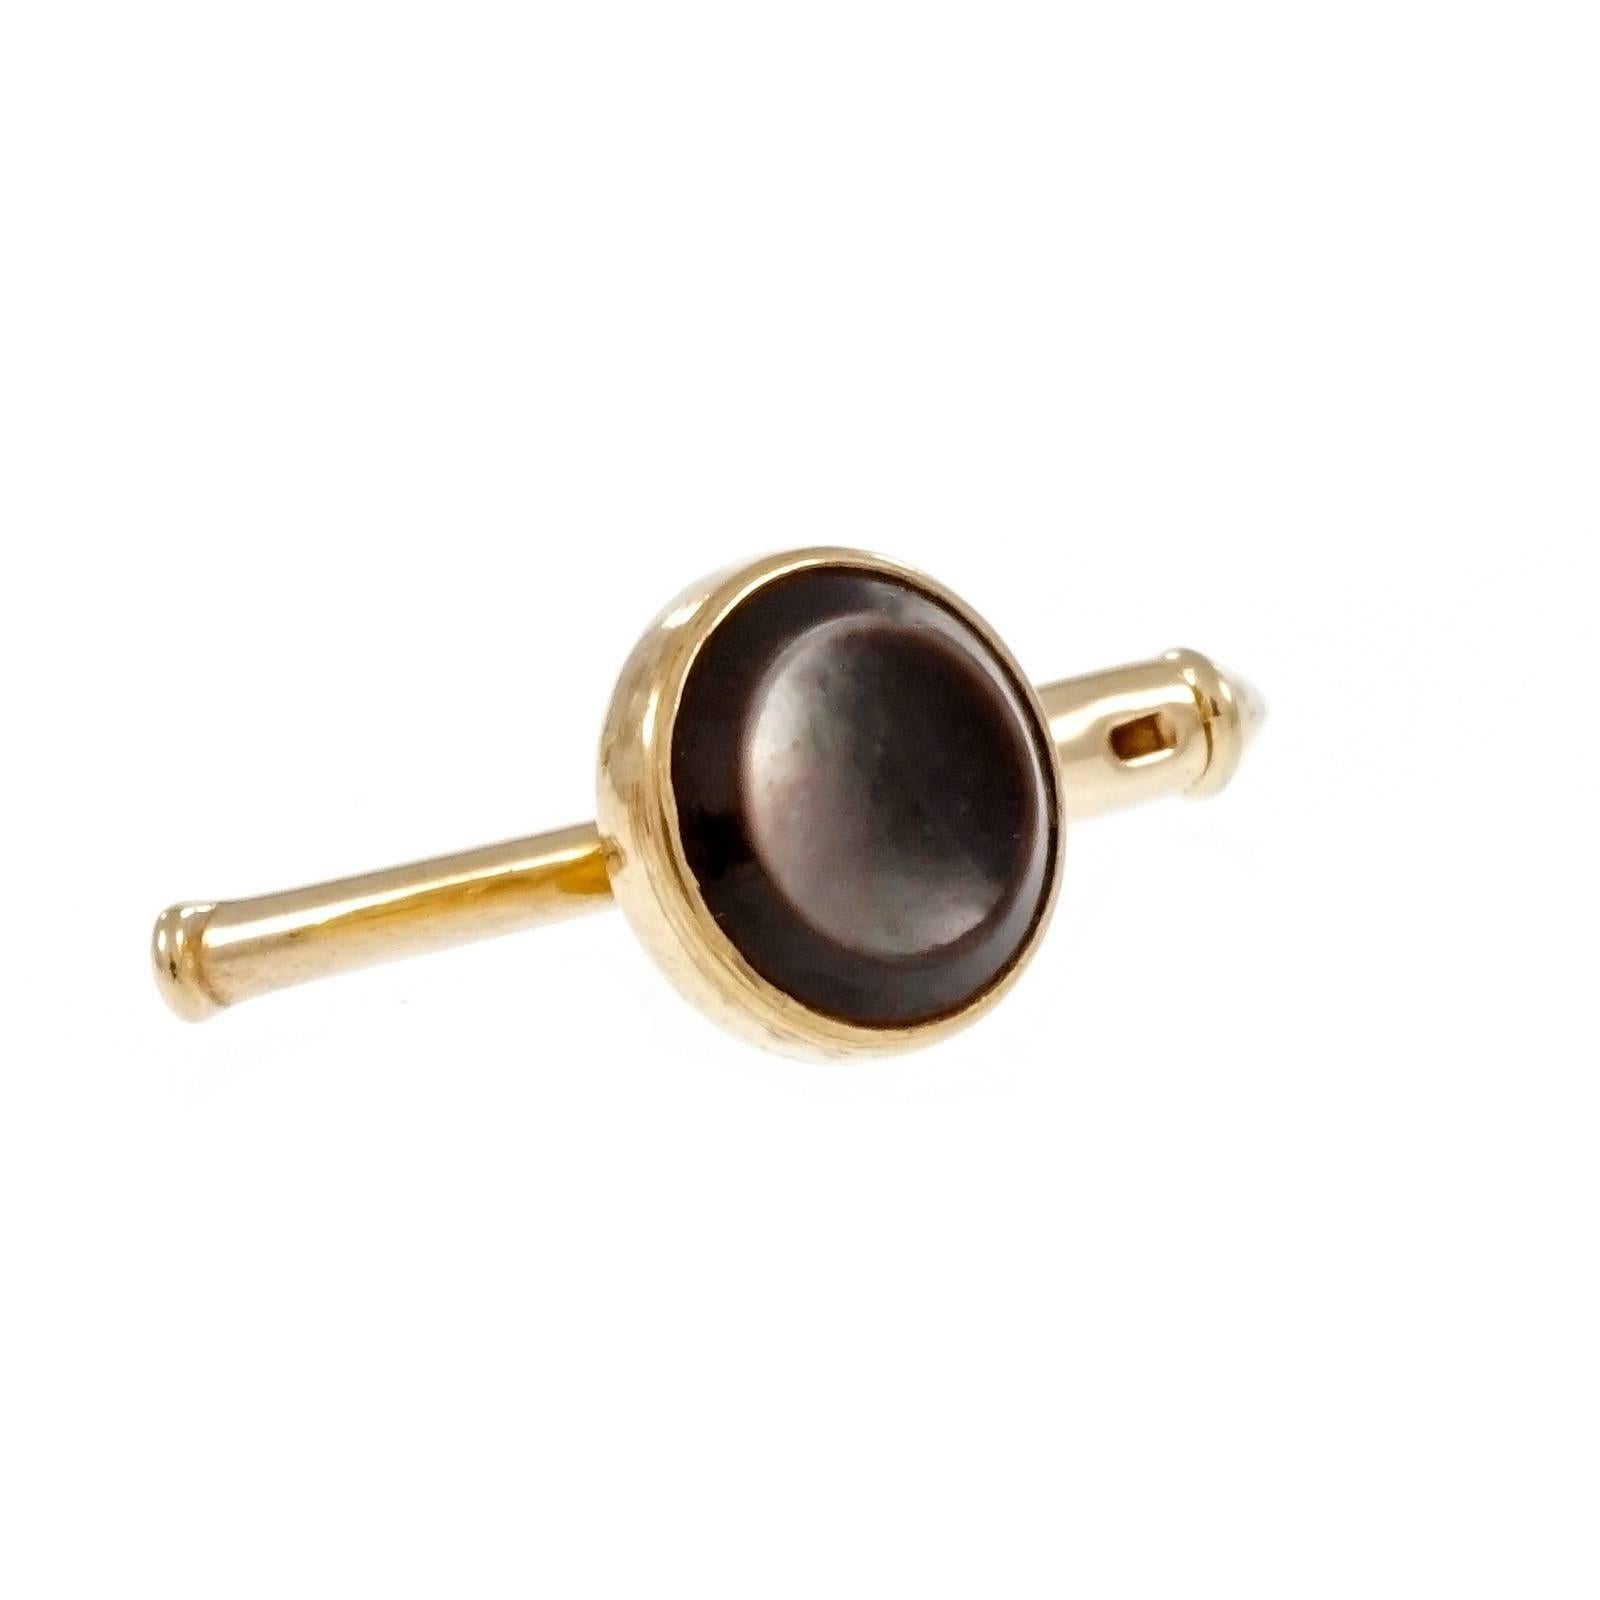 Larter & Sons black Mother of Pearl over black Onyx 10k yellow gold cufflinks and 3 piece shirt stud set, circa 1920.

4 Mother of Pearl over Onyx 12.70mm
3 Mother of Pearl over Onyx 7.45mm
10k yellow gold
Tested: 10k
Stamped: 10
Hallmark: